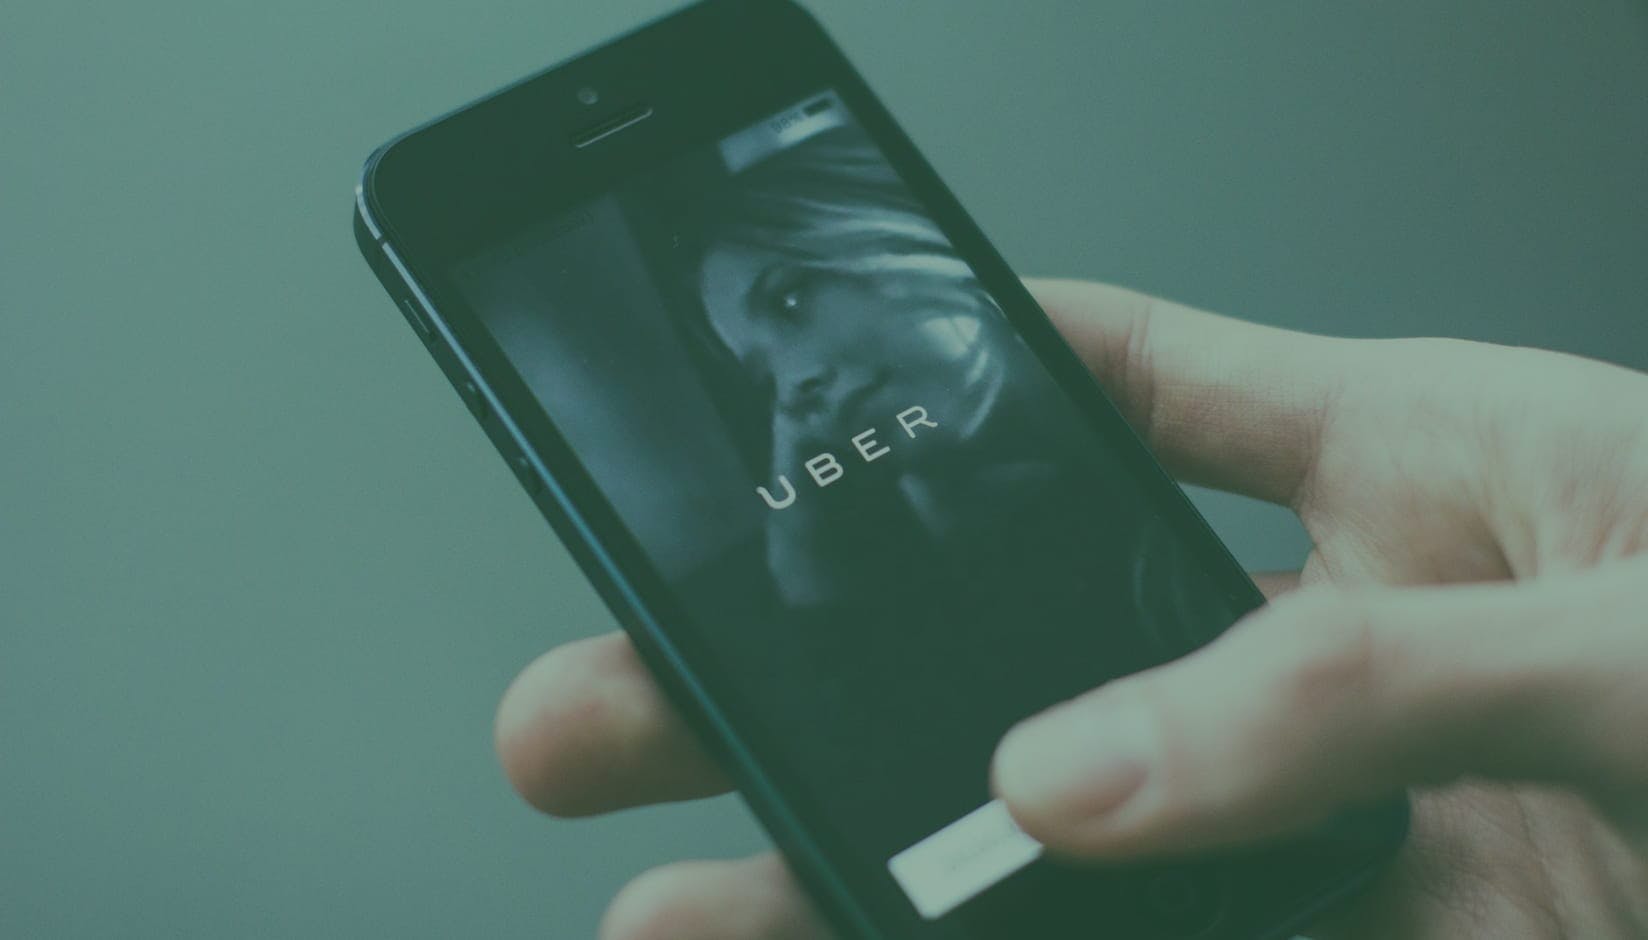 Uber app on the phone as an example of company that started at a coworking space